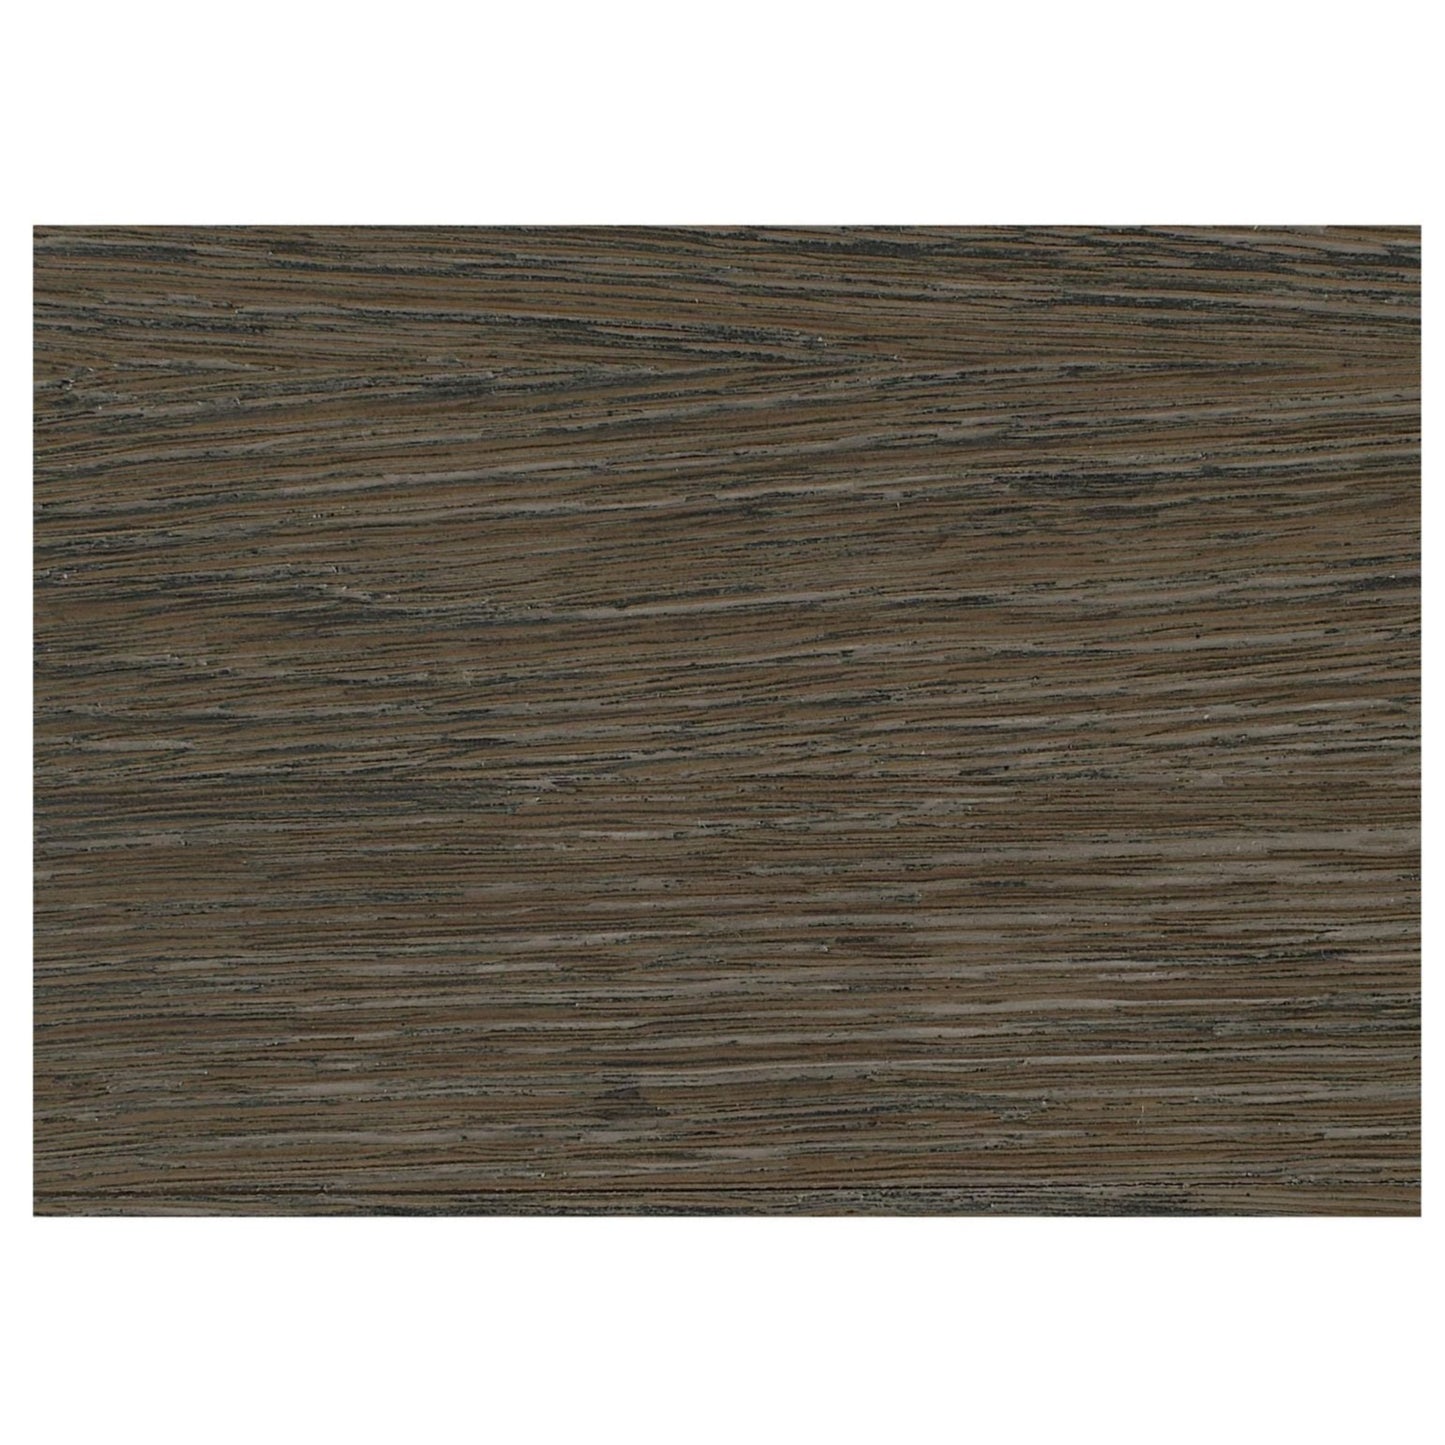 Stone top, 3 color options  34x18x24h